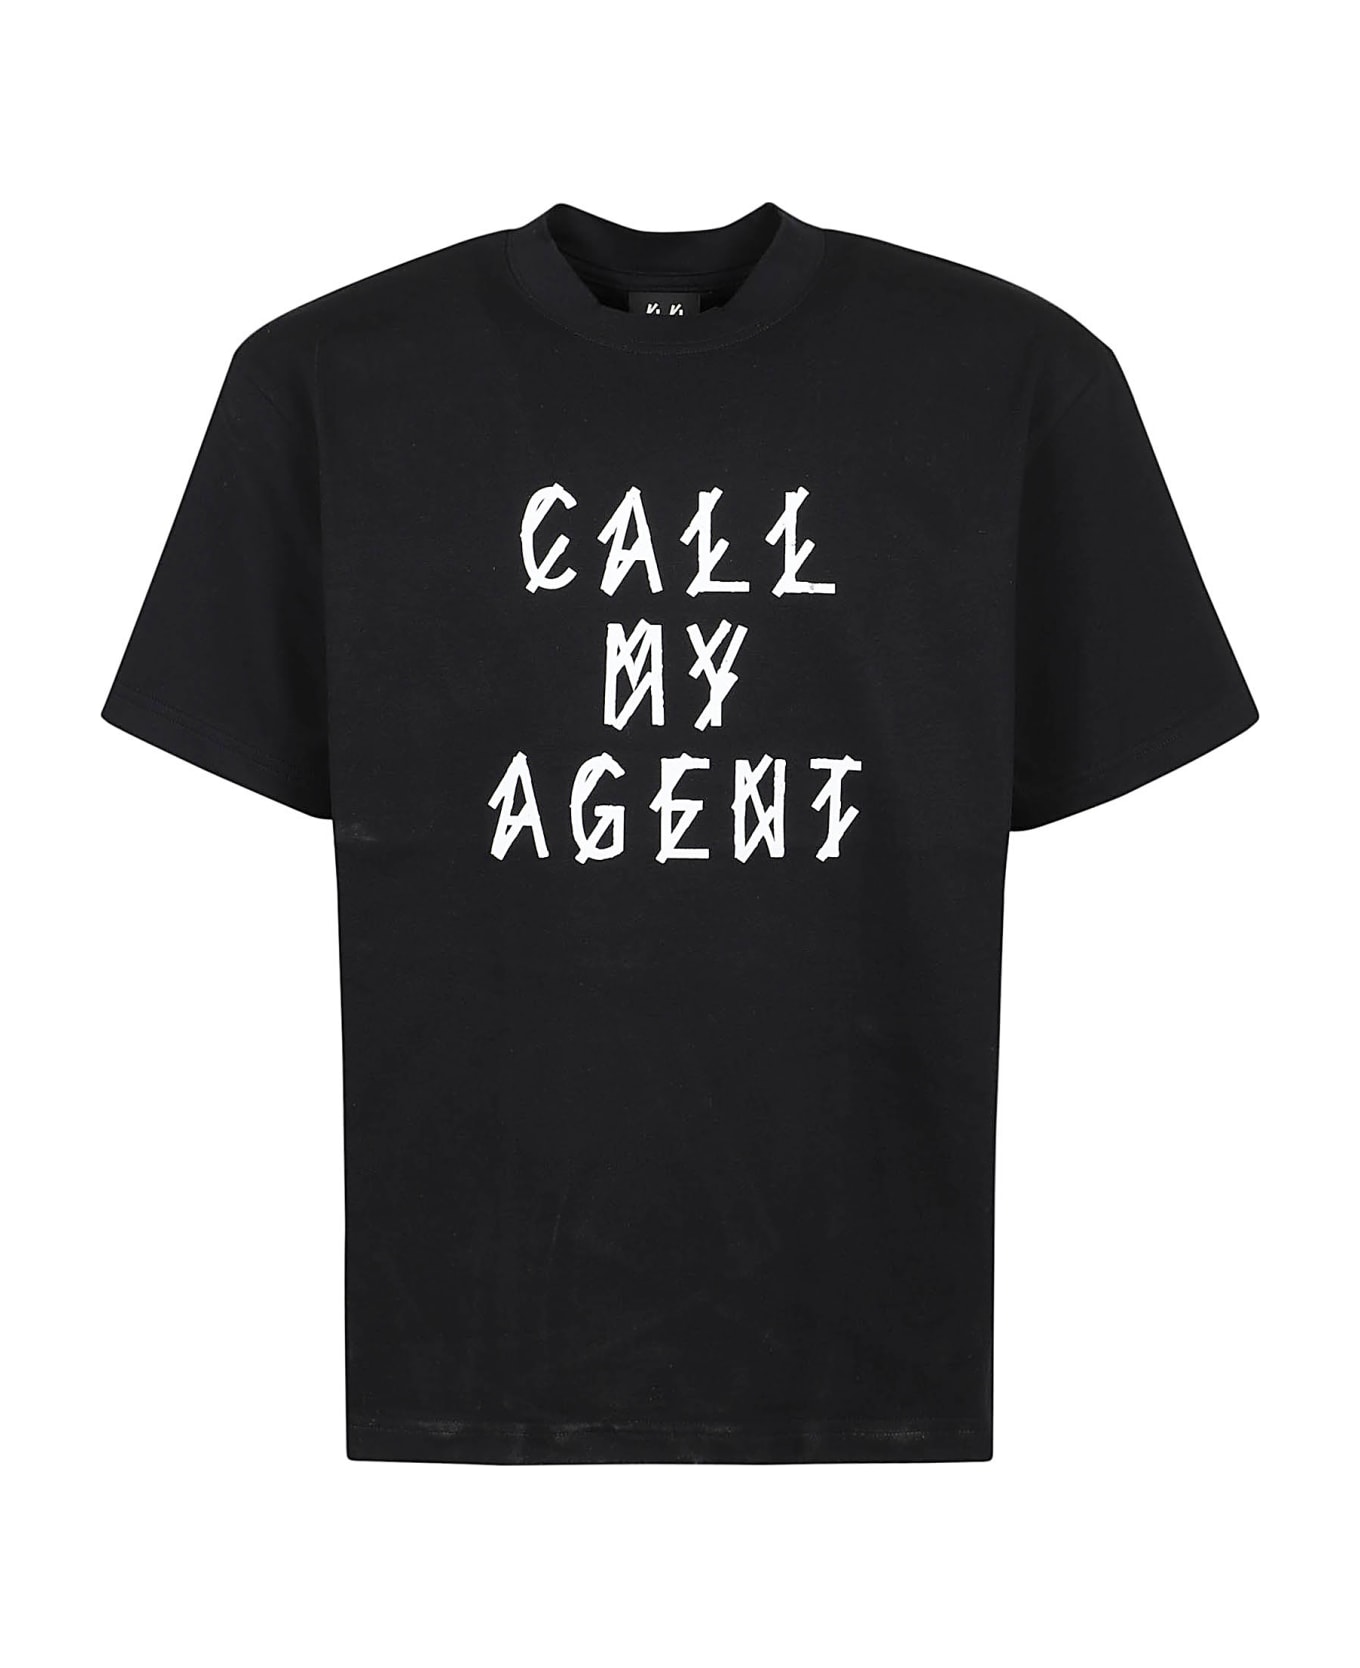 44 Label Group Classic Tee - Black Call My Agent